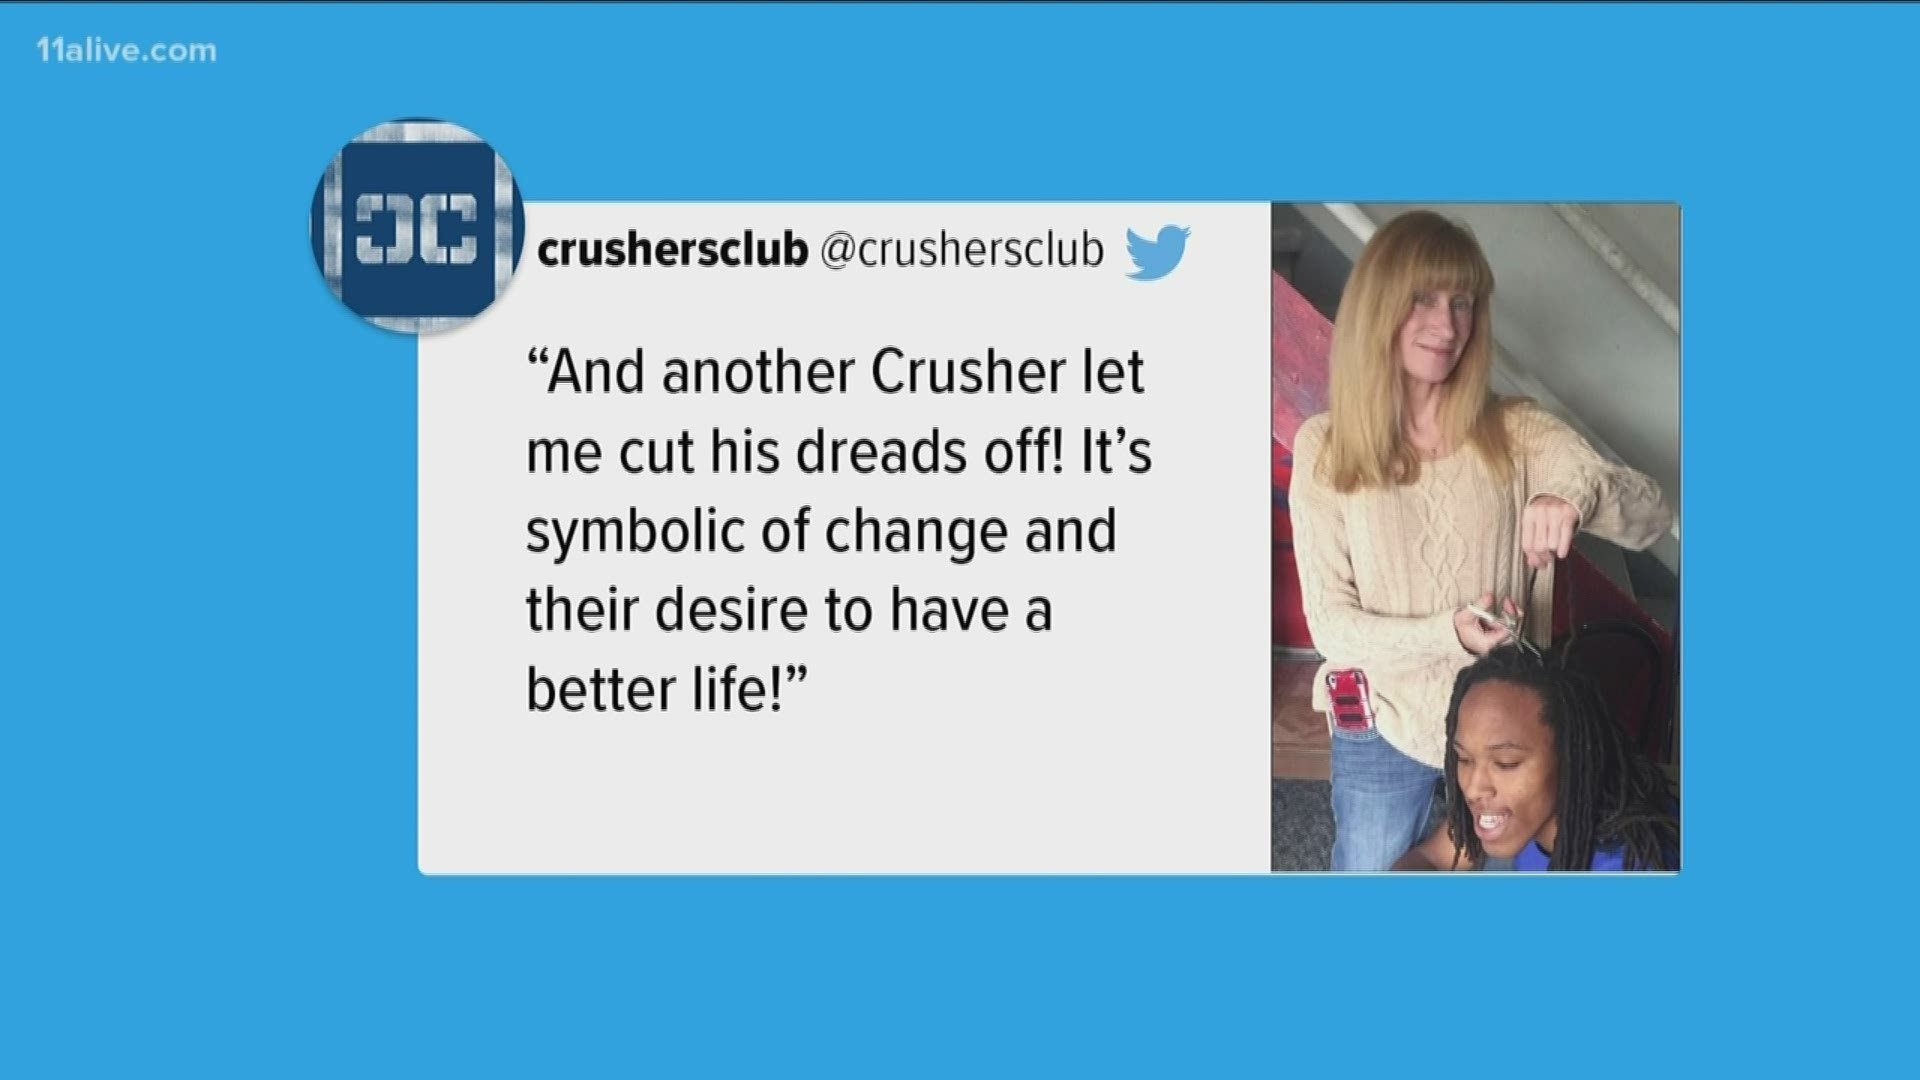 The now-deleted post showed Crusher Club CEO and founder Sally Hazelgrove cutting off the dreadlocks of two black teens with a caption some found troubling.